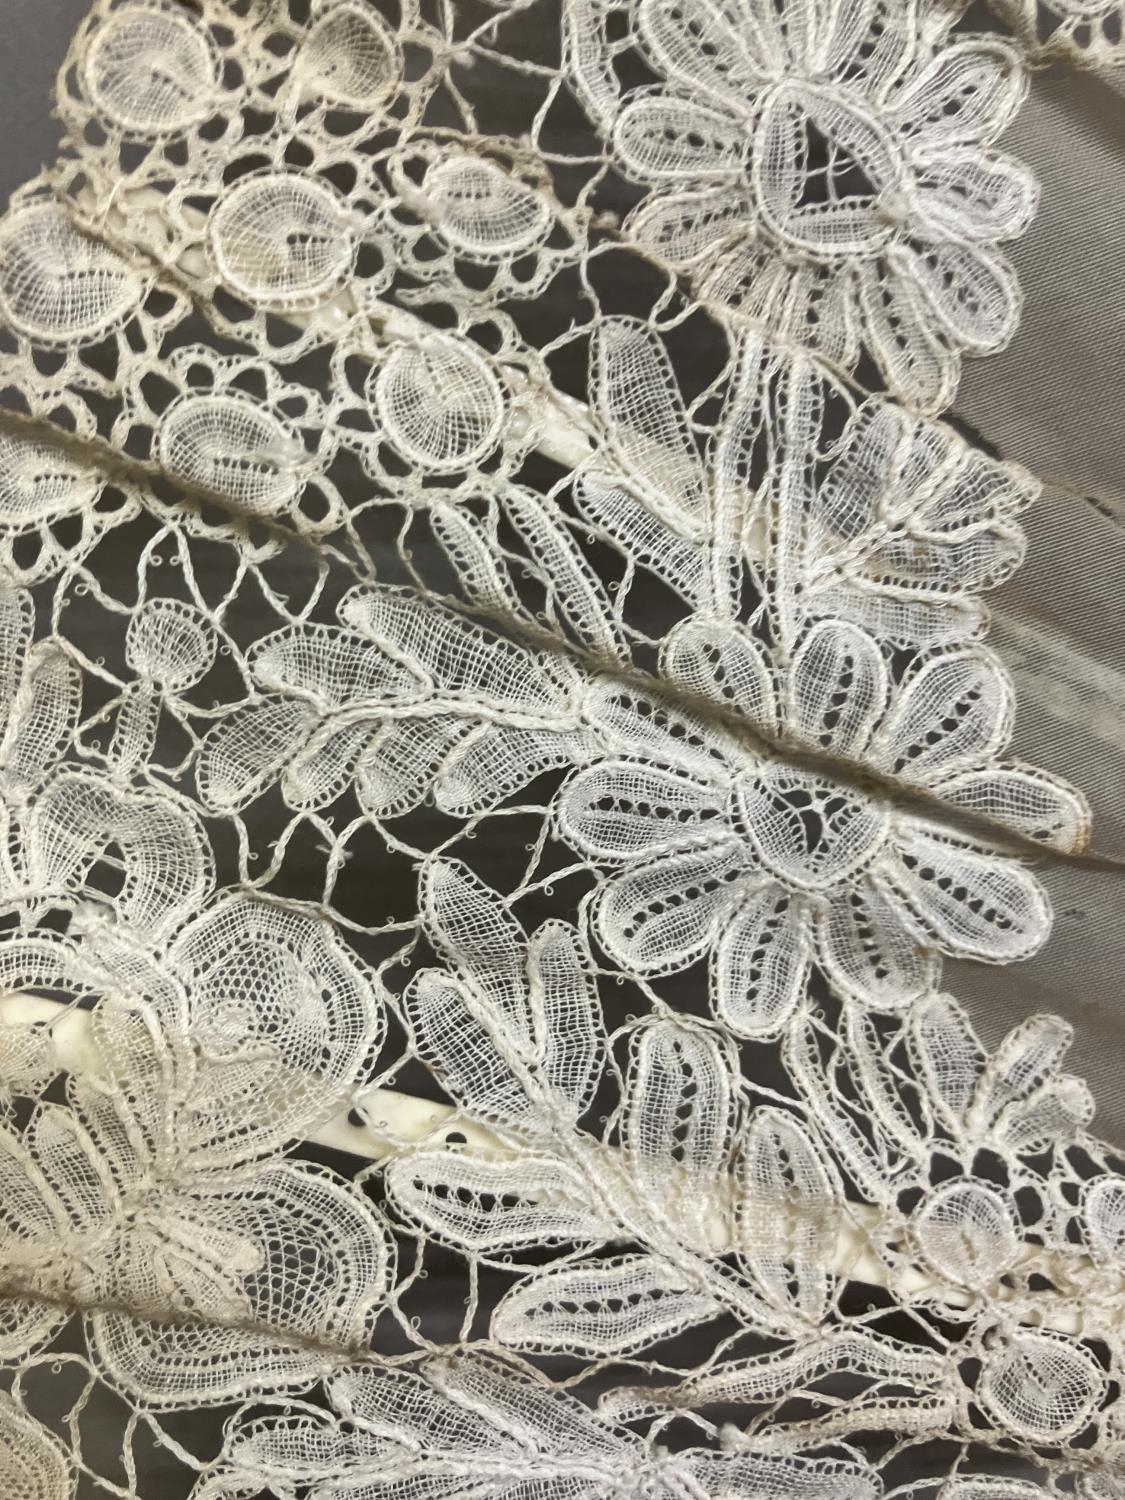 A good Brussels lace fan, mounted on mother of pearl, burgau, including the ribs, the leaf most - Bild 13 aus 13